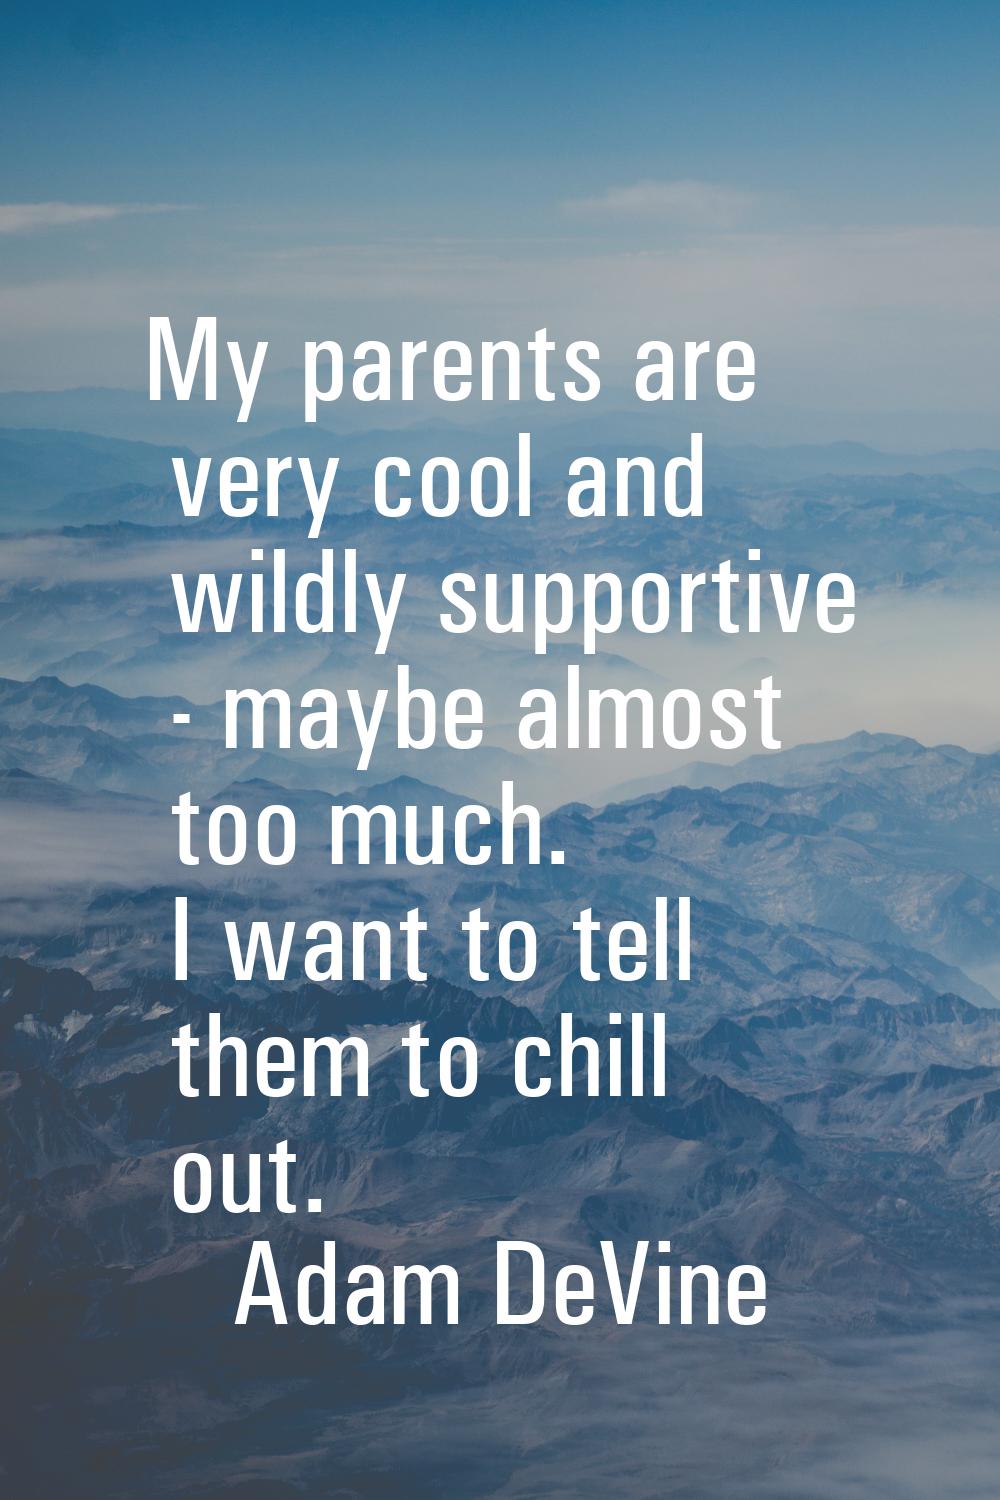 My parents are very cool and wildly supportive - maybe almost too much. I want to tell them to chil